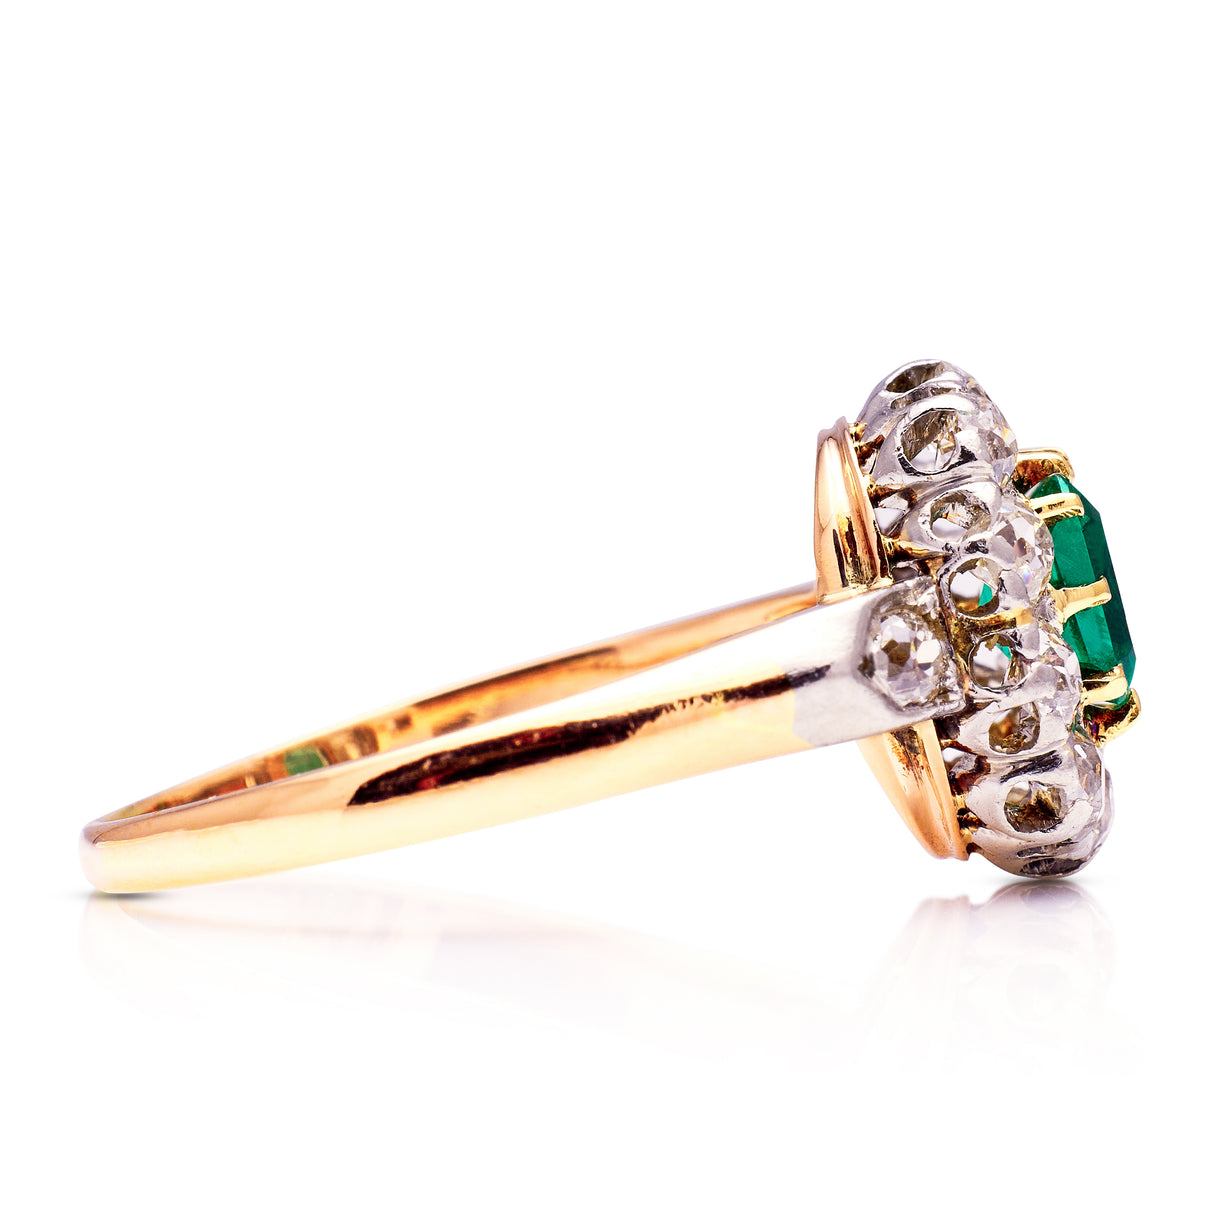 Antique emerald and diamond cluster ring, side view.